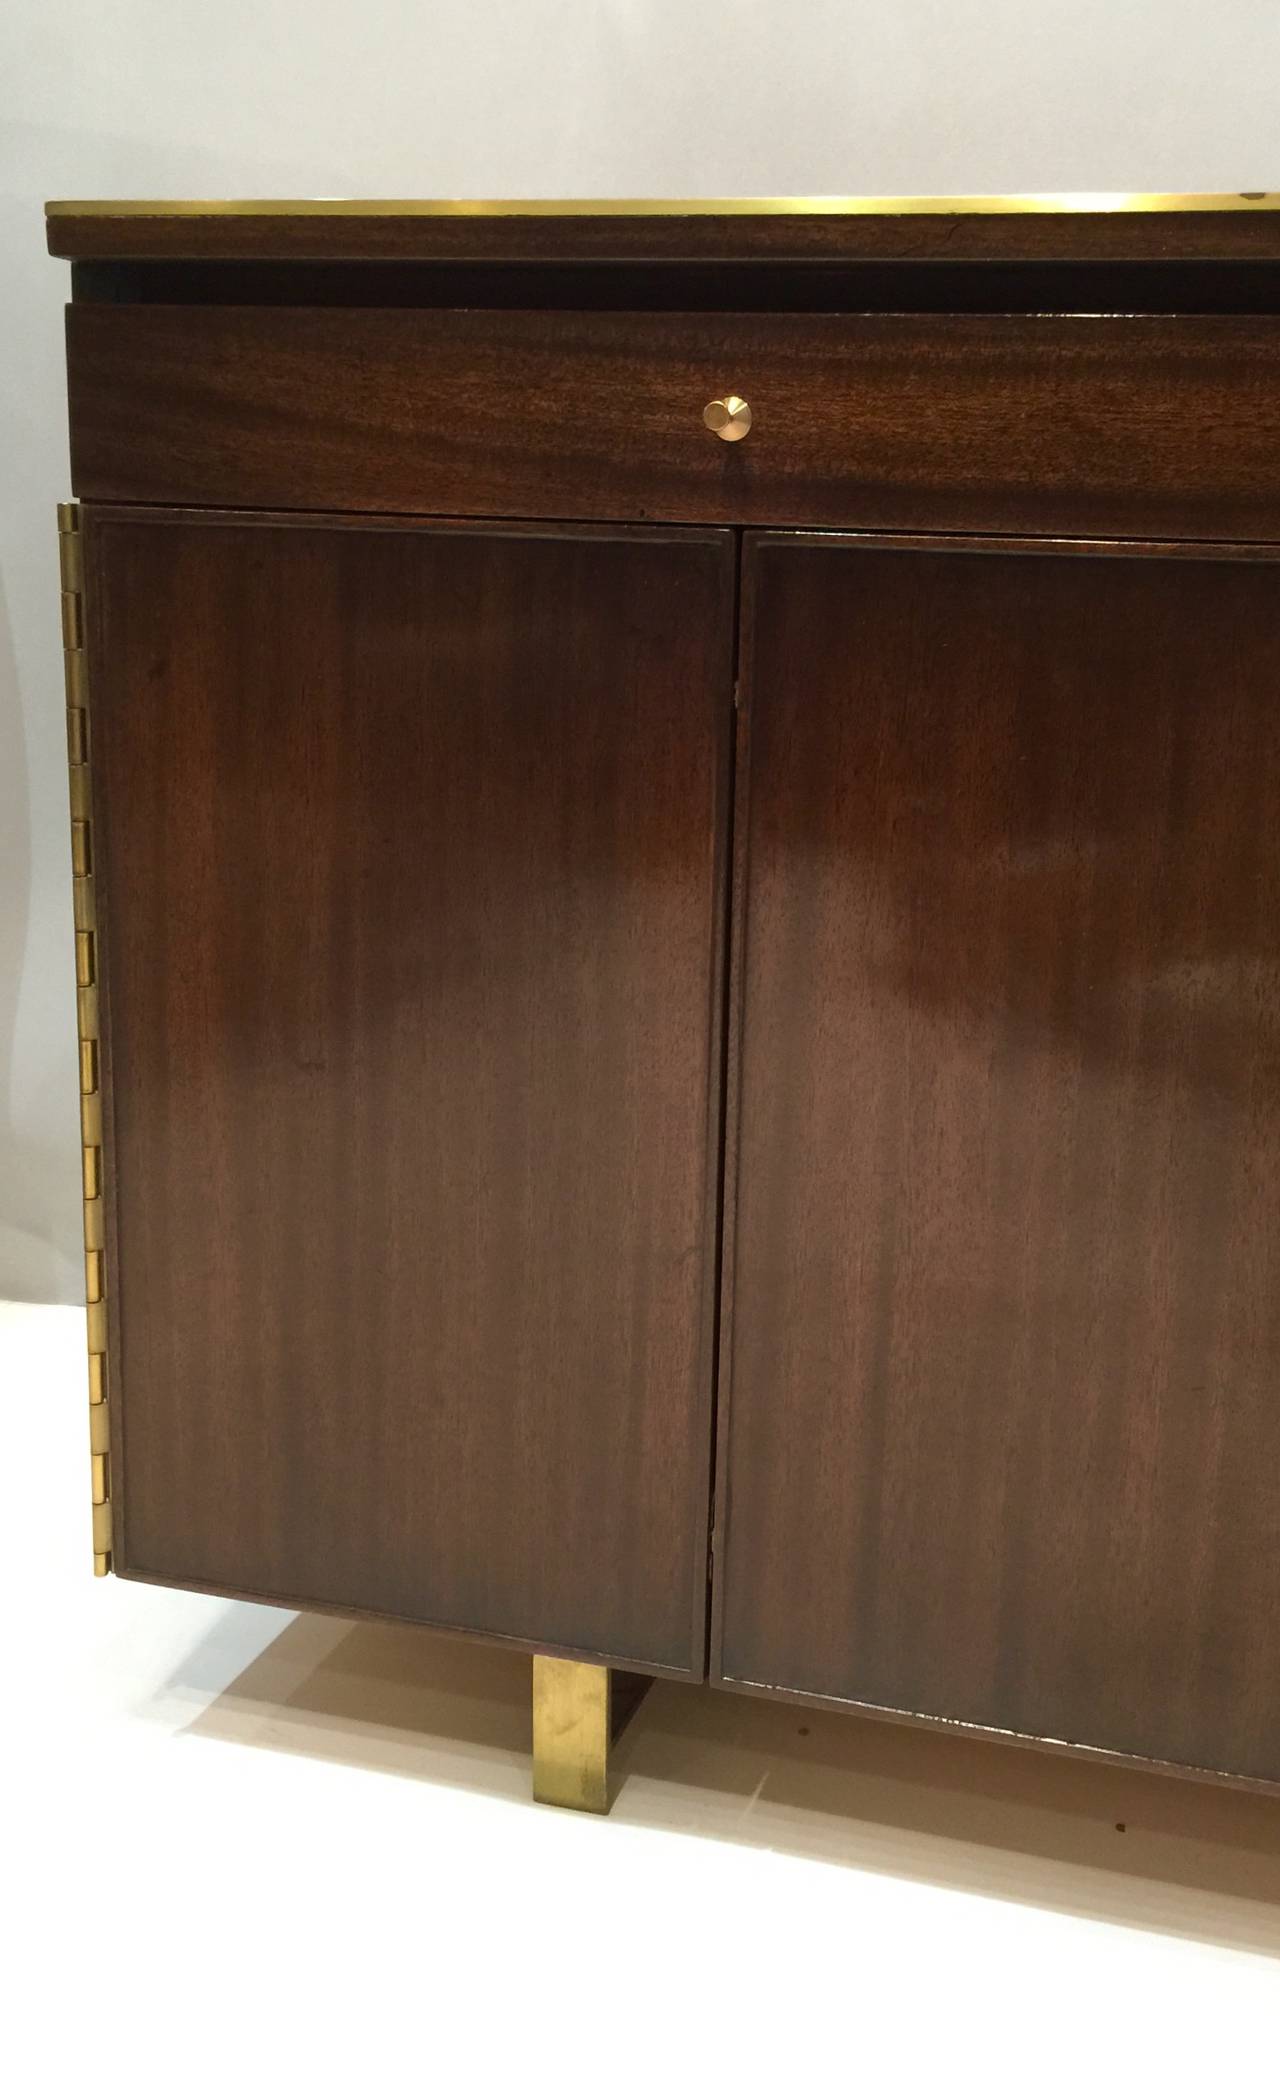 A Paul McCobb Credenza For Calvin Trimmed In Brass On Brass Legs.  Three Drawers Over A Pair Of Trifold Doors That Conceal Shelving On The Left And Drawers On The Right